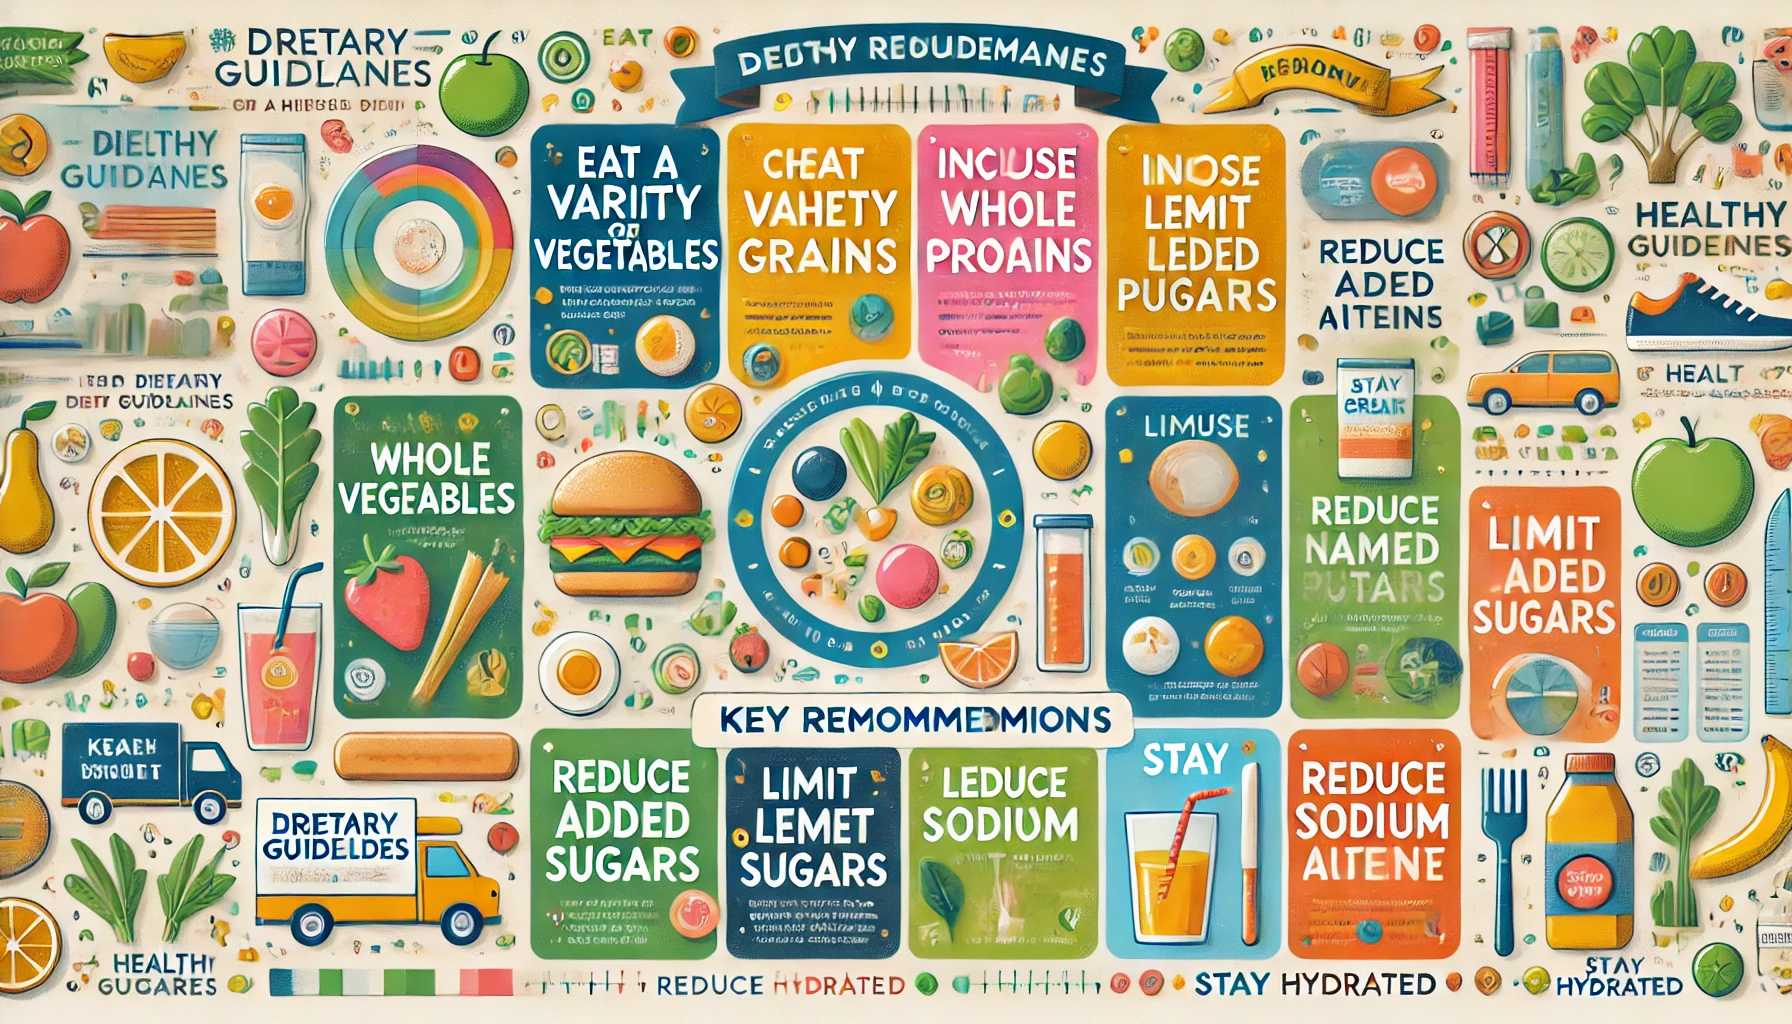 Key Recommendations of the Dietary Guidelines for a Healthy Diet